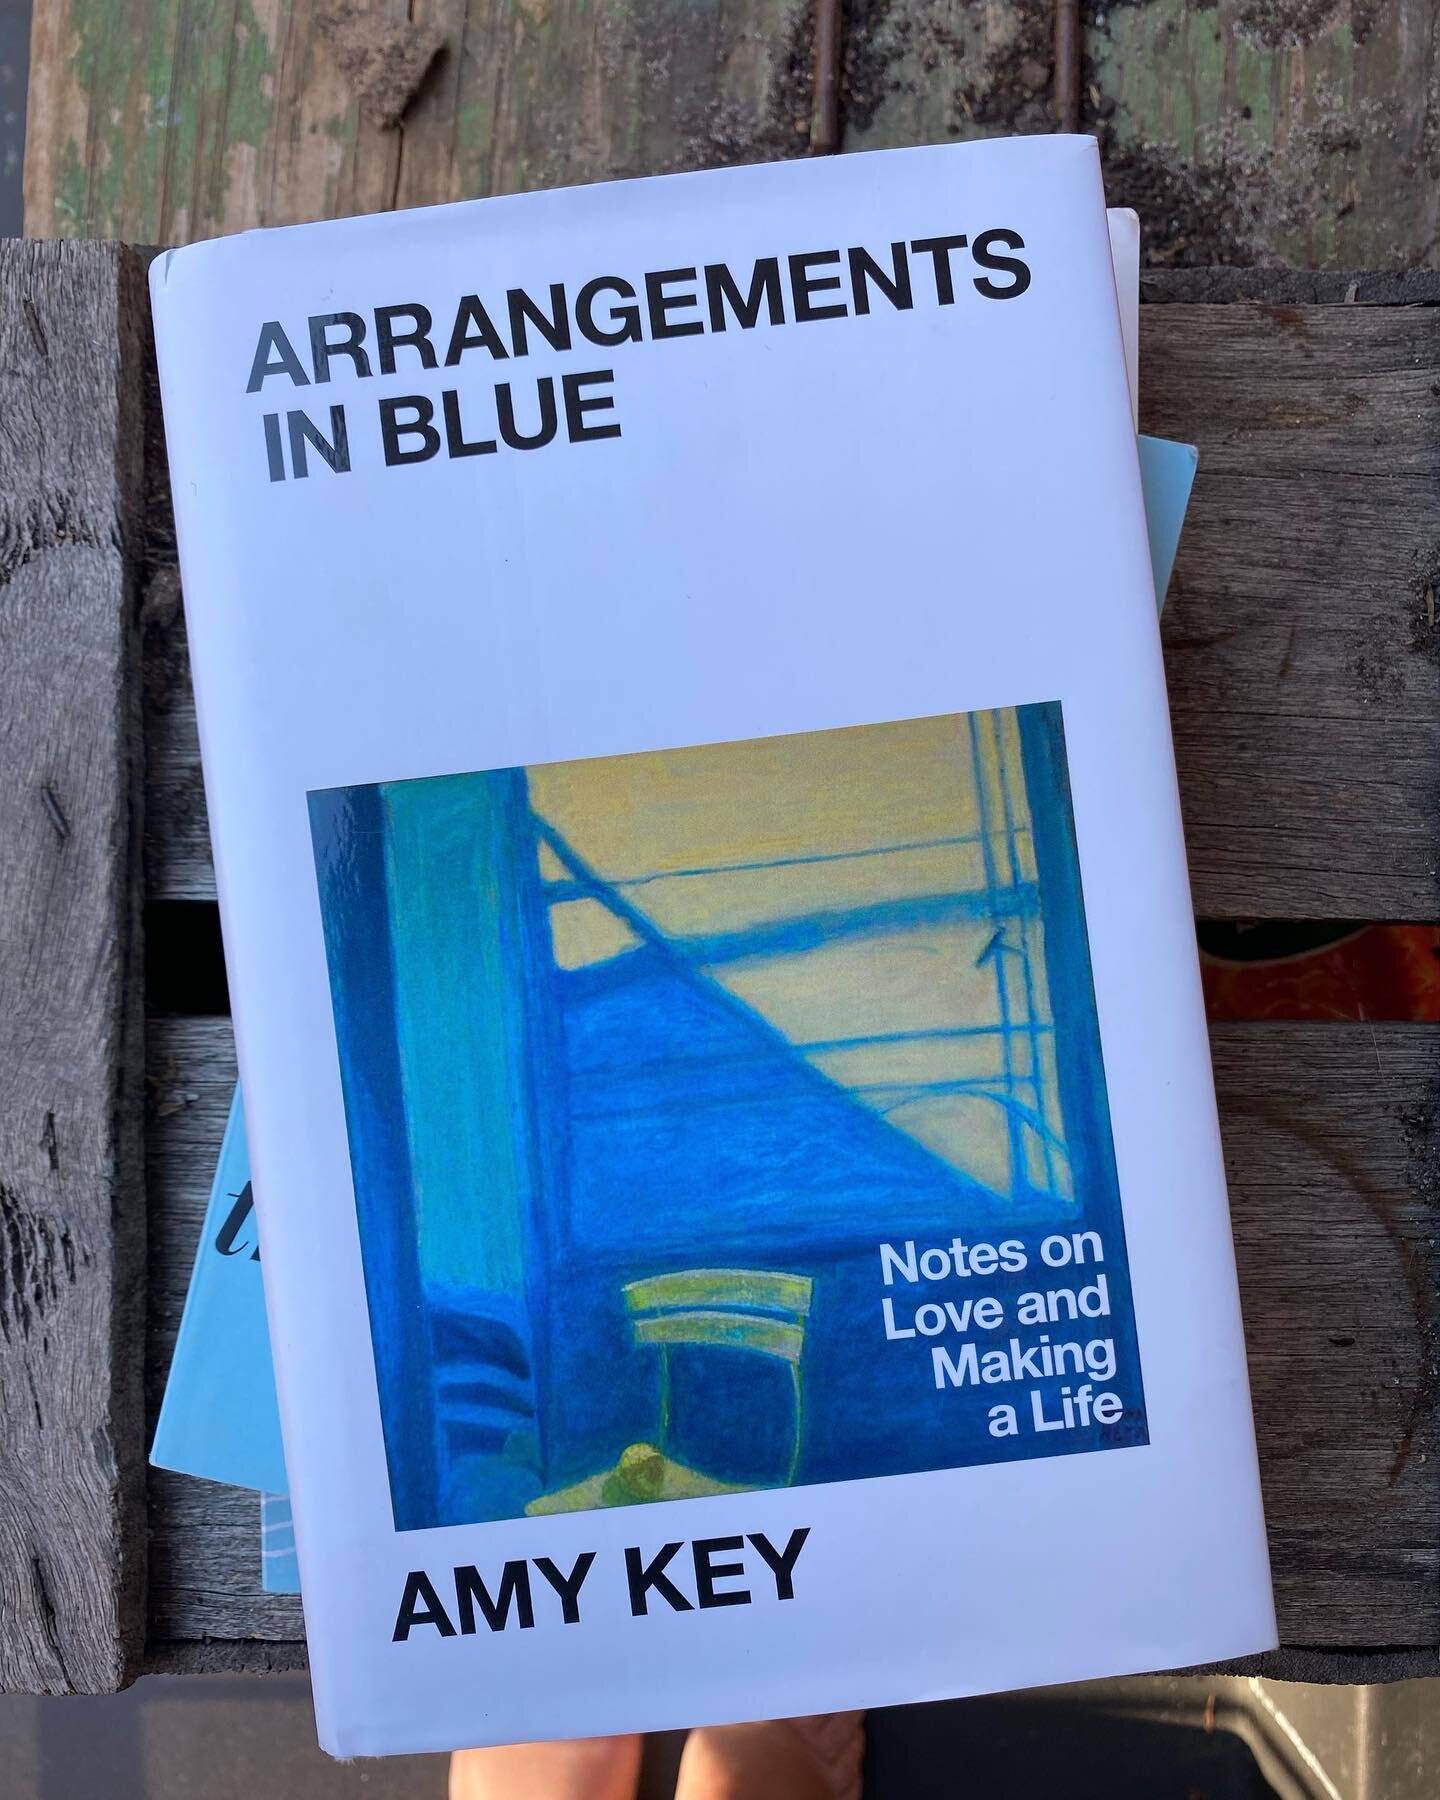 recent / current / future

🔹Arrangements in Blue: Notes on Love and Making a Life by Amy Key 
🔹This Is How You Lose the Time War by Amal El-Mohtar and Max Gladstone
🔹Body Friend by Katherine Brabon

#TheCoverWasBlue #BooksellerCliches #Reading